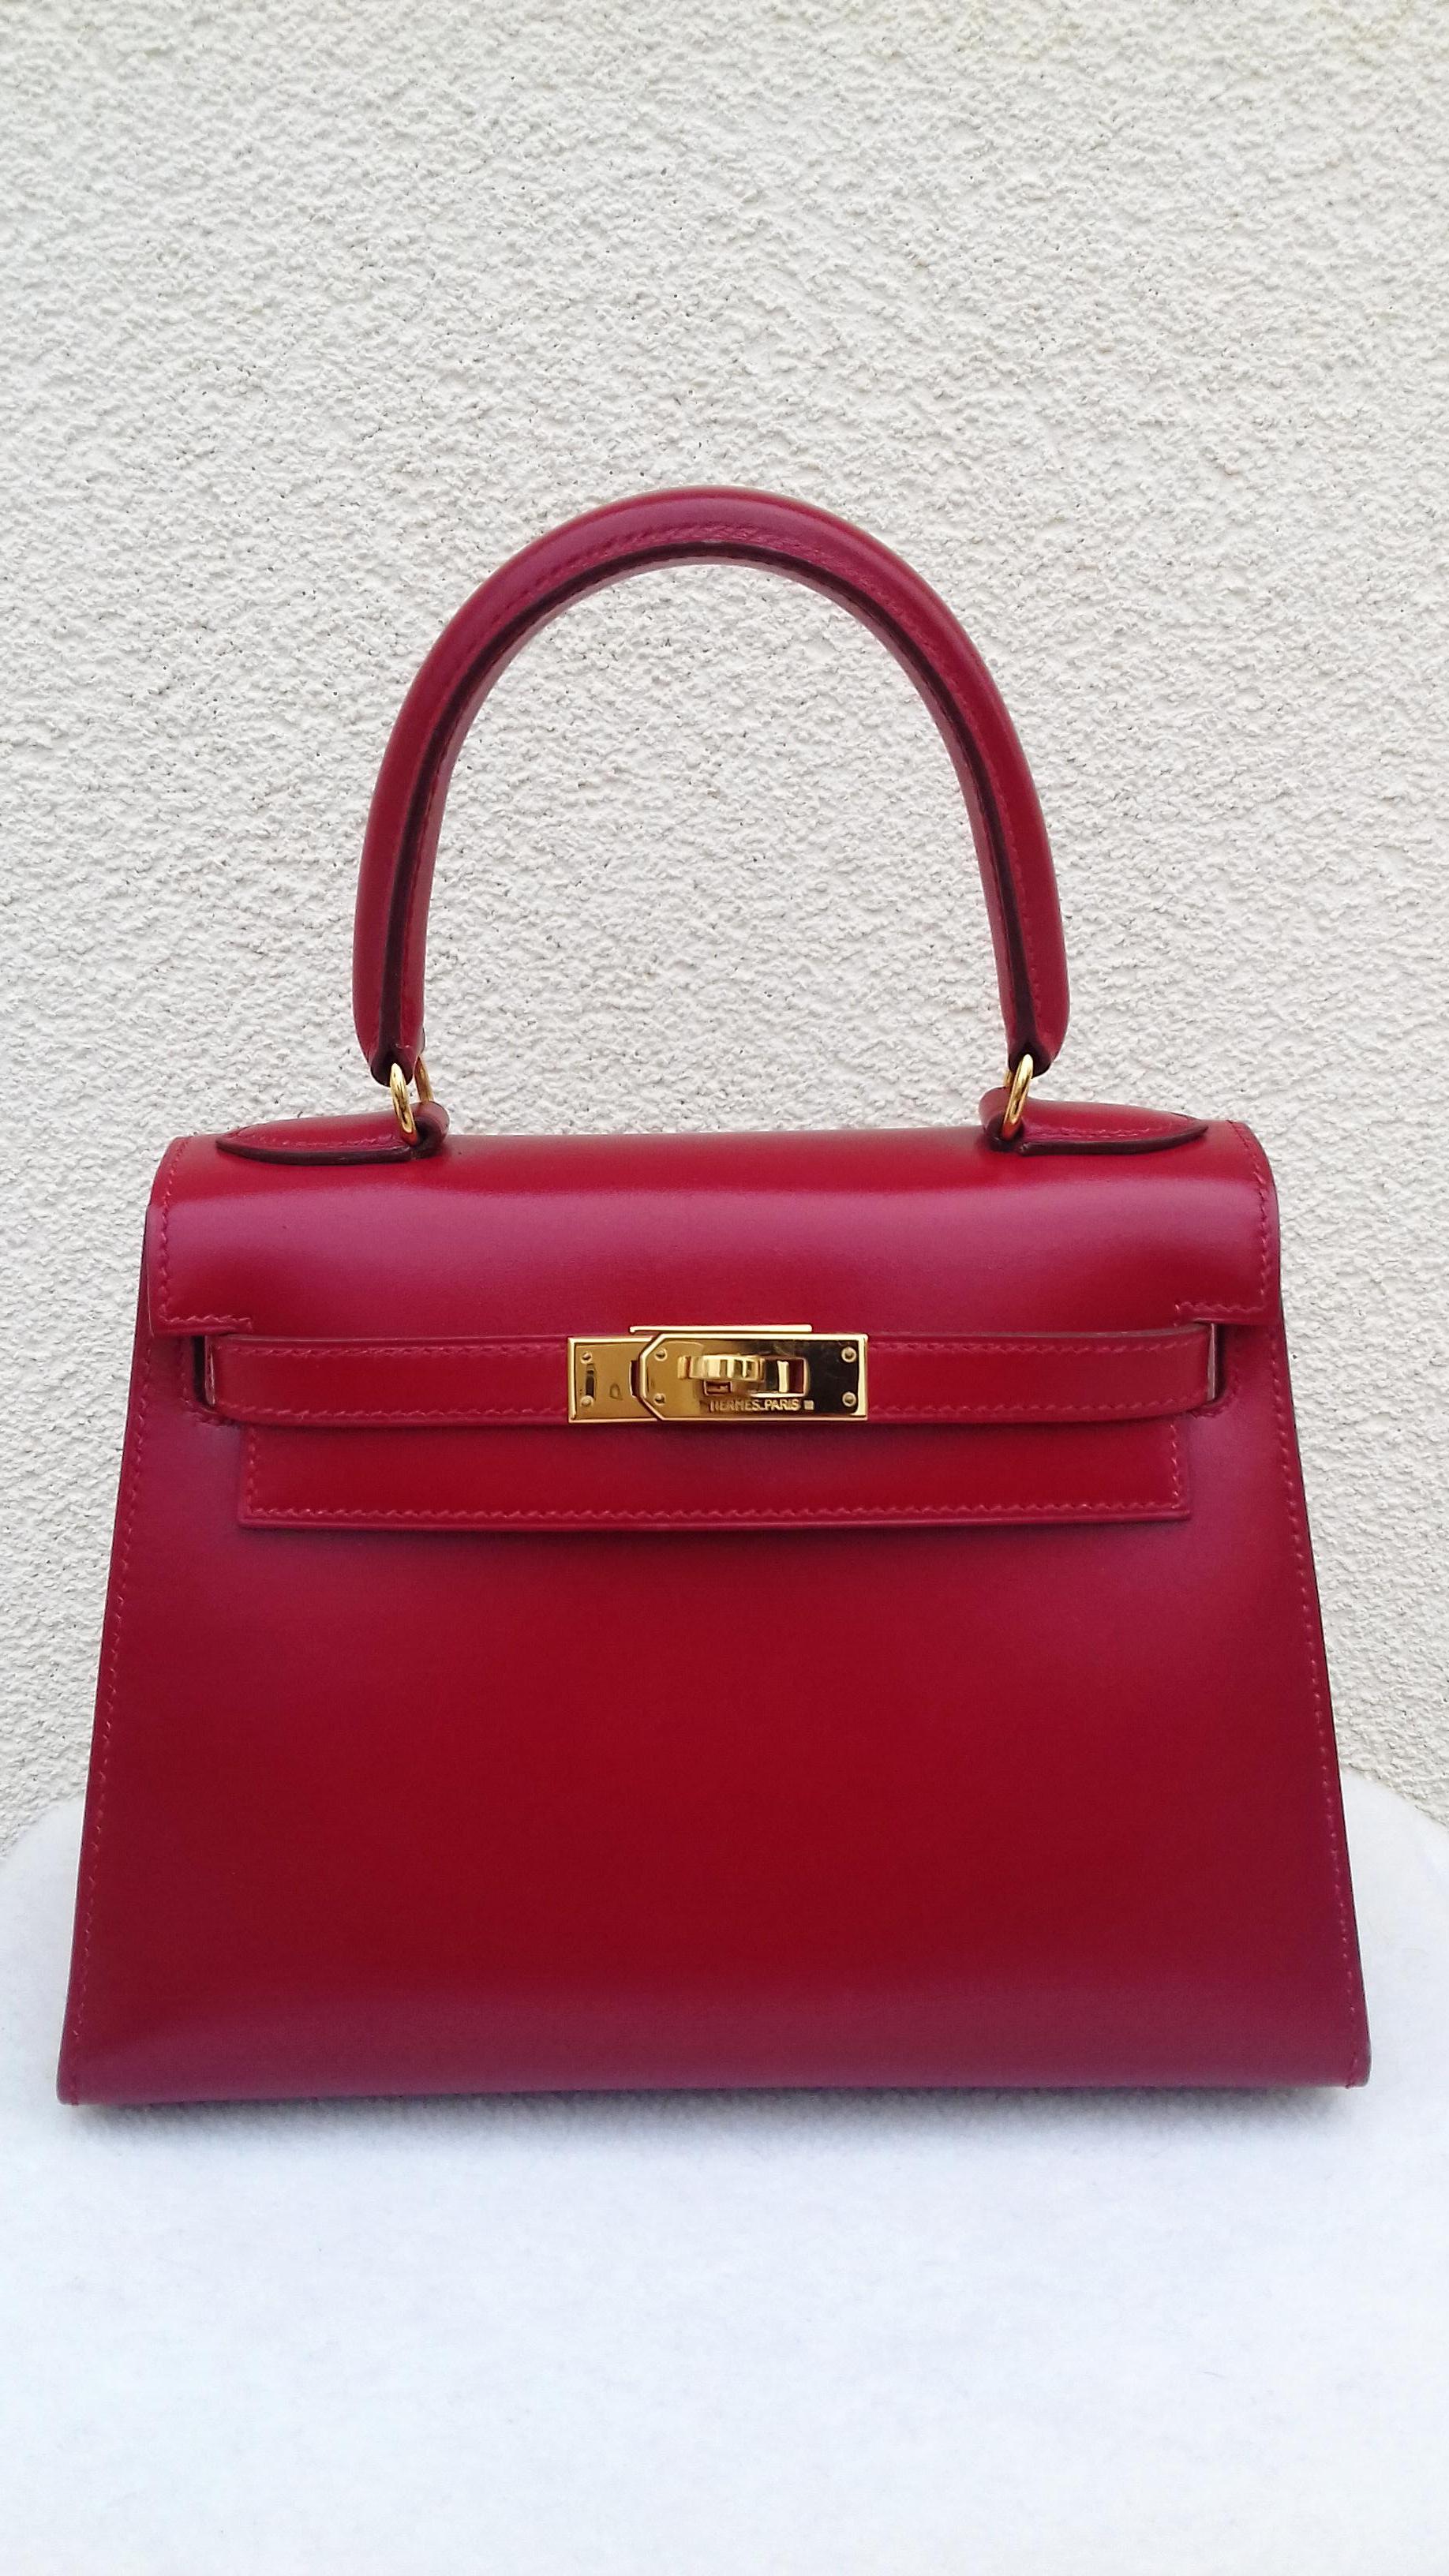 Super Cute Authentic Hermès Mini Kelly Bag

In sellier Version, more chic !

Made in France

Stamp U in a circle (1991)

Made of Box Leather and Golden Hardware

Inside is lined with grained red leather

Colorway: Rouge vif (Red)

1 main